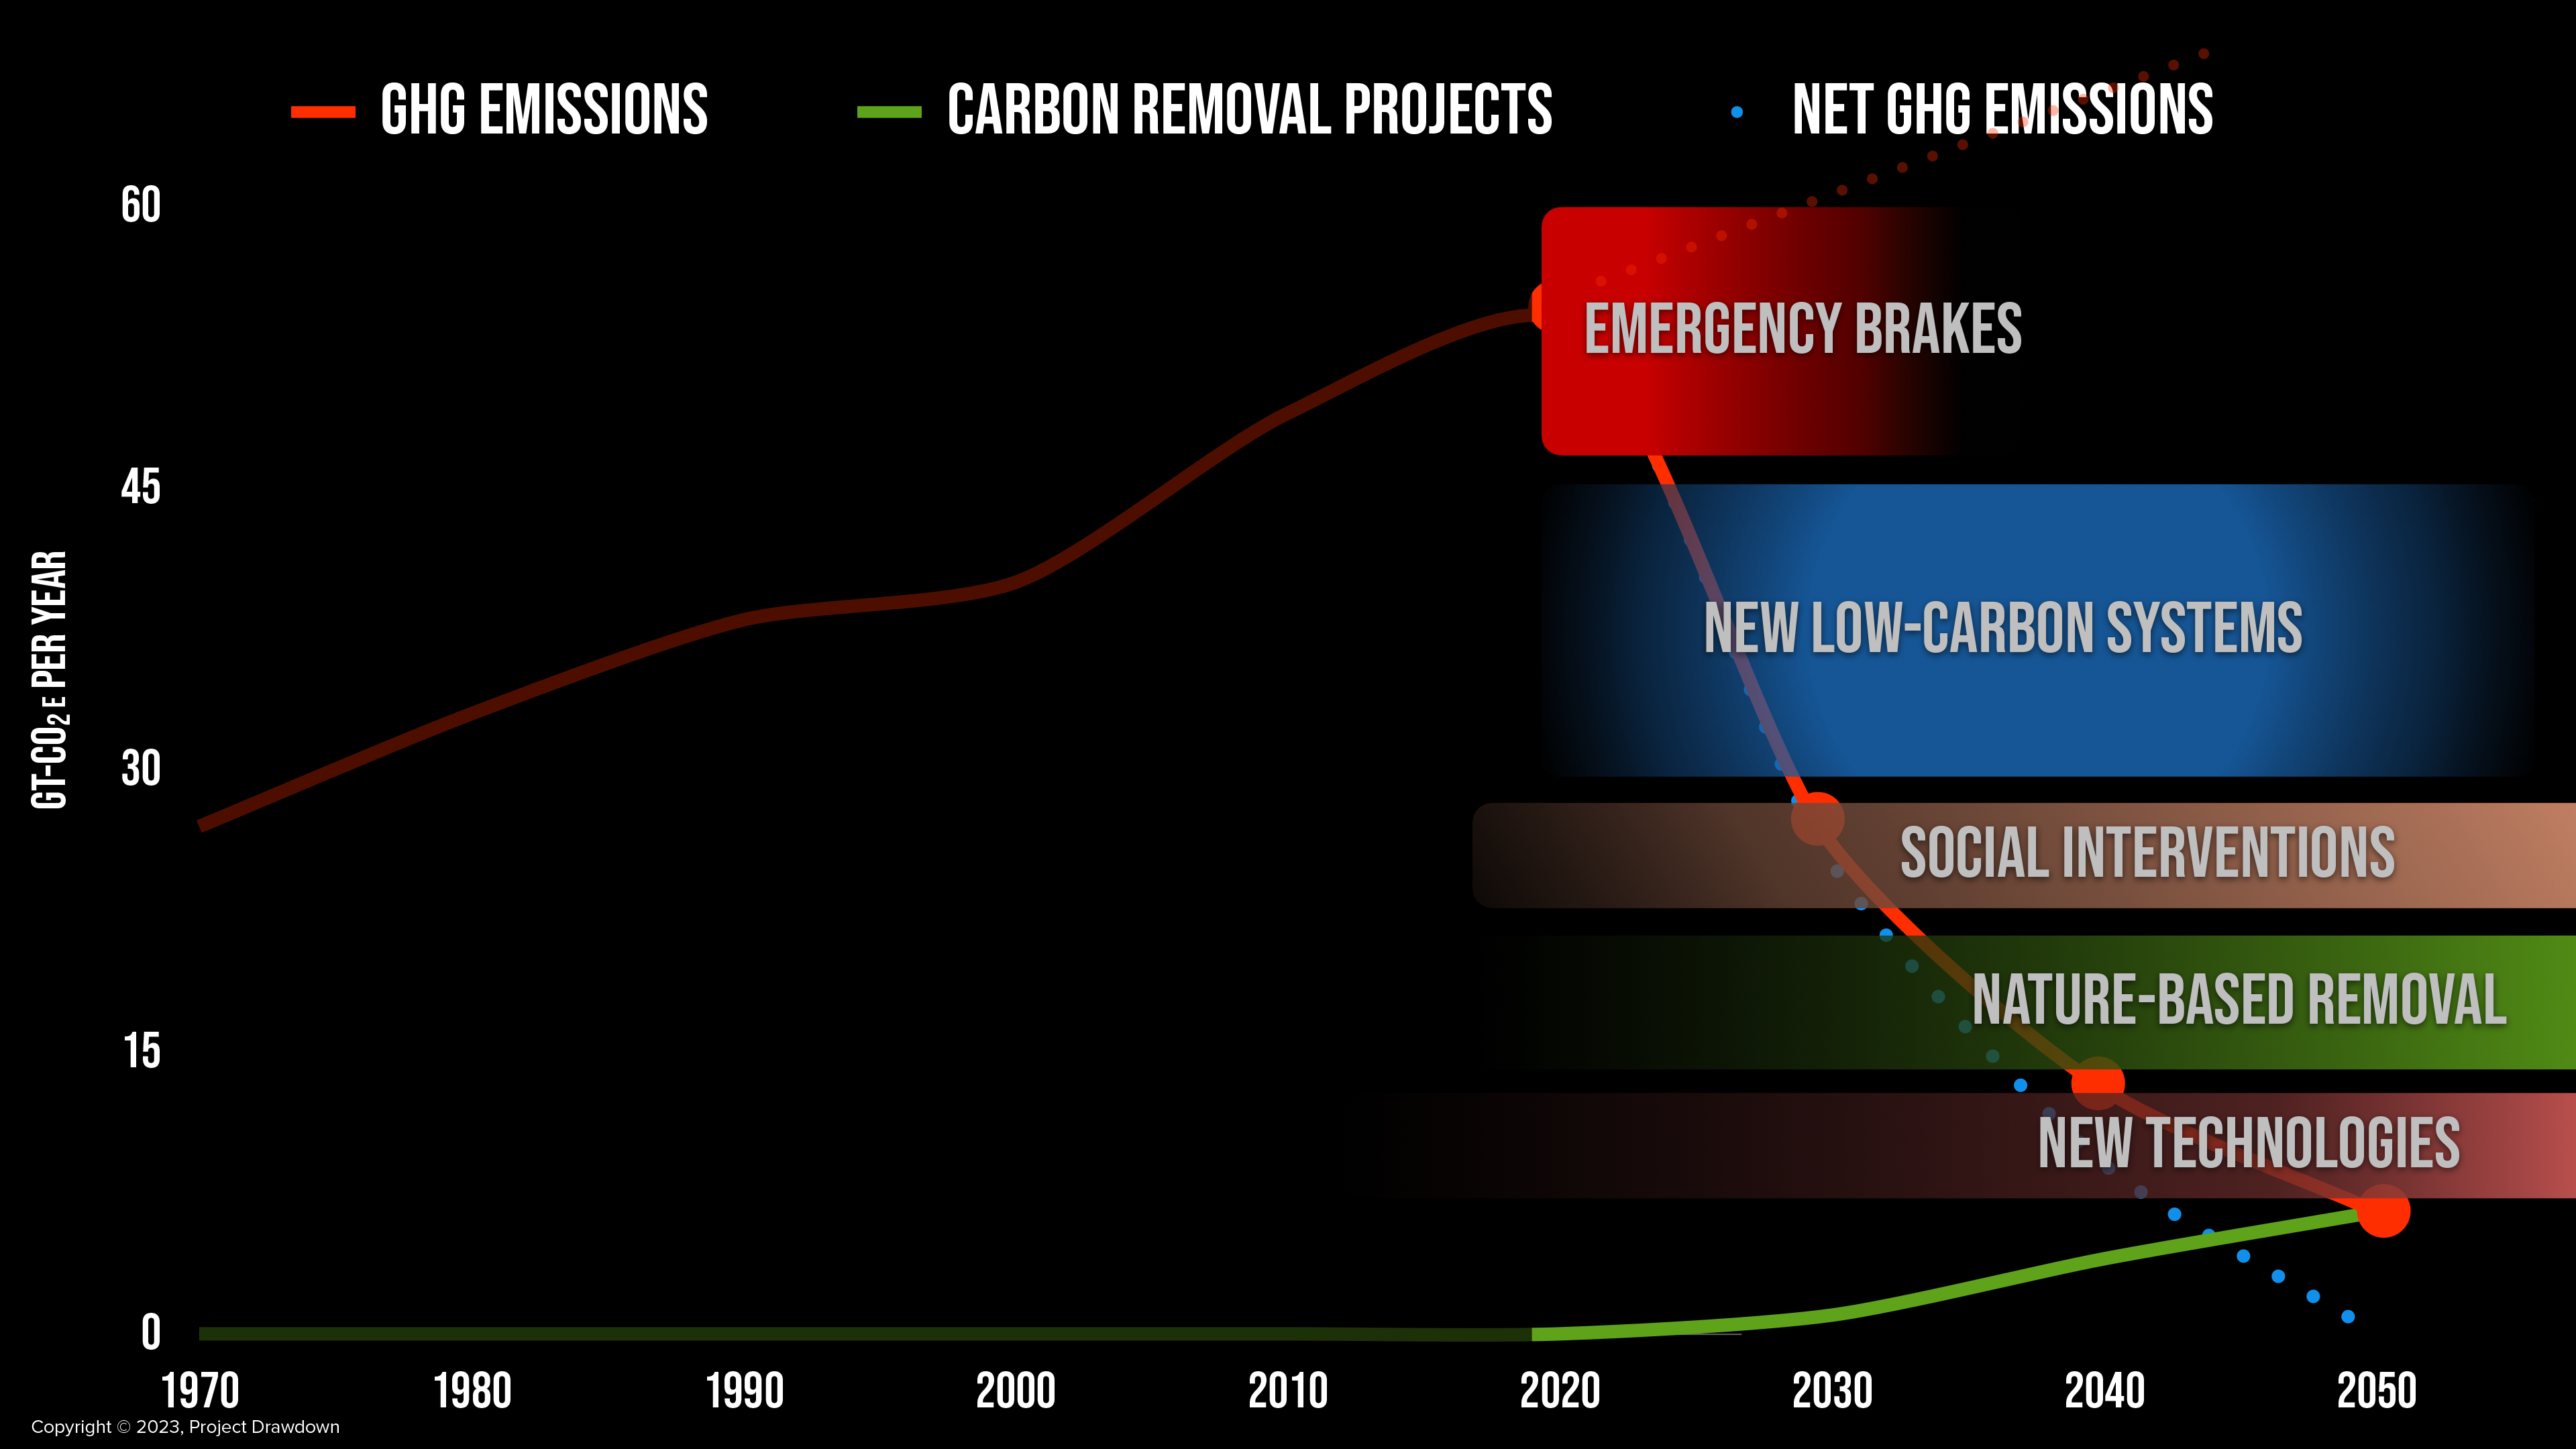 A graph of annual greenhouse gas emissions showing projected emissions through 2050 and the impact of carbon removal projects.